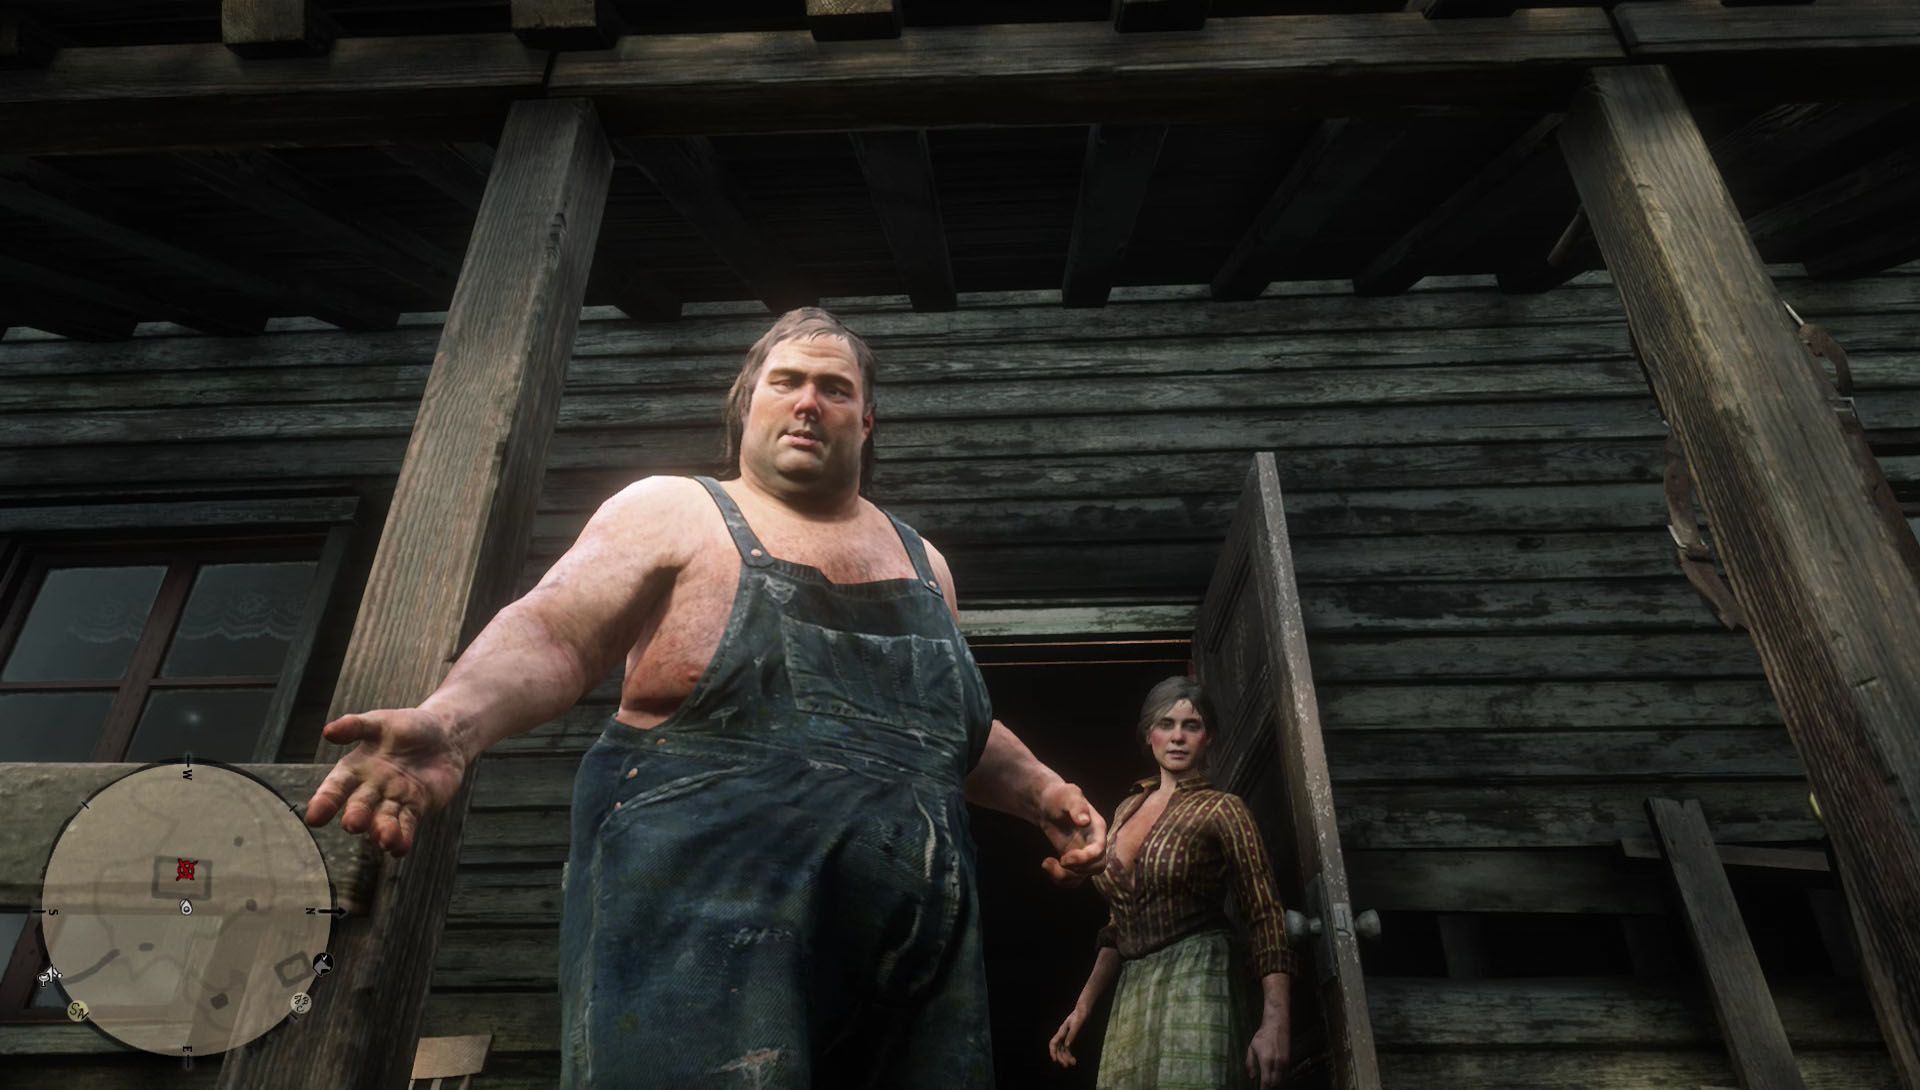 A large man in overalls beckons you inside along with a petite woman standing in the doorway.